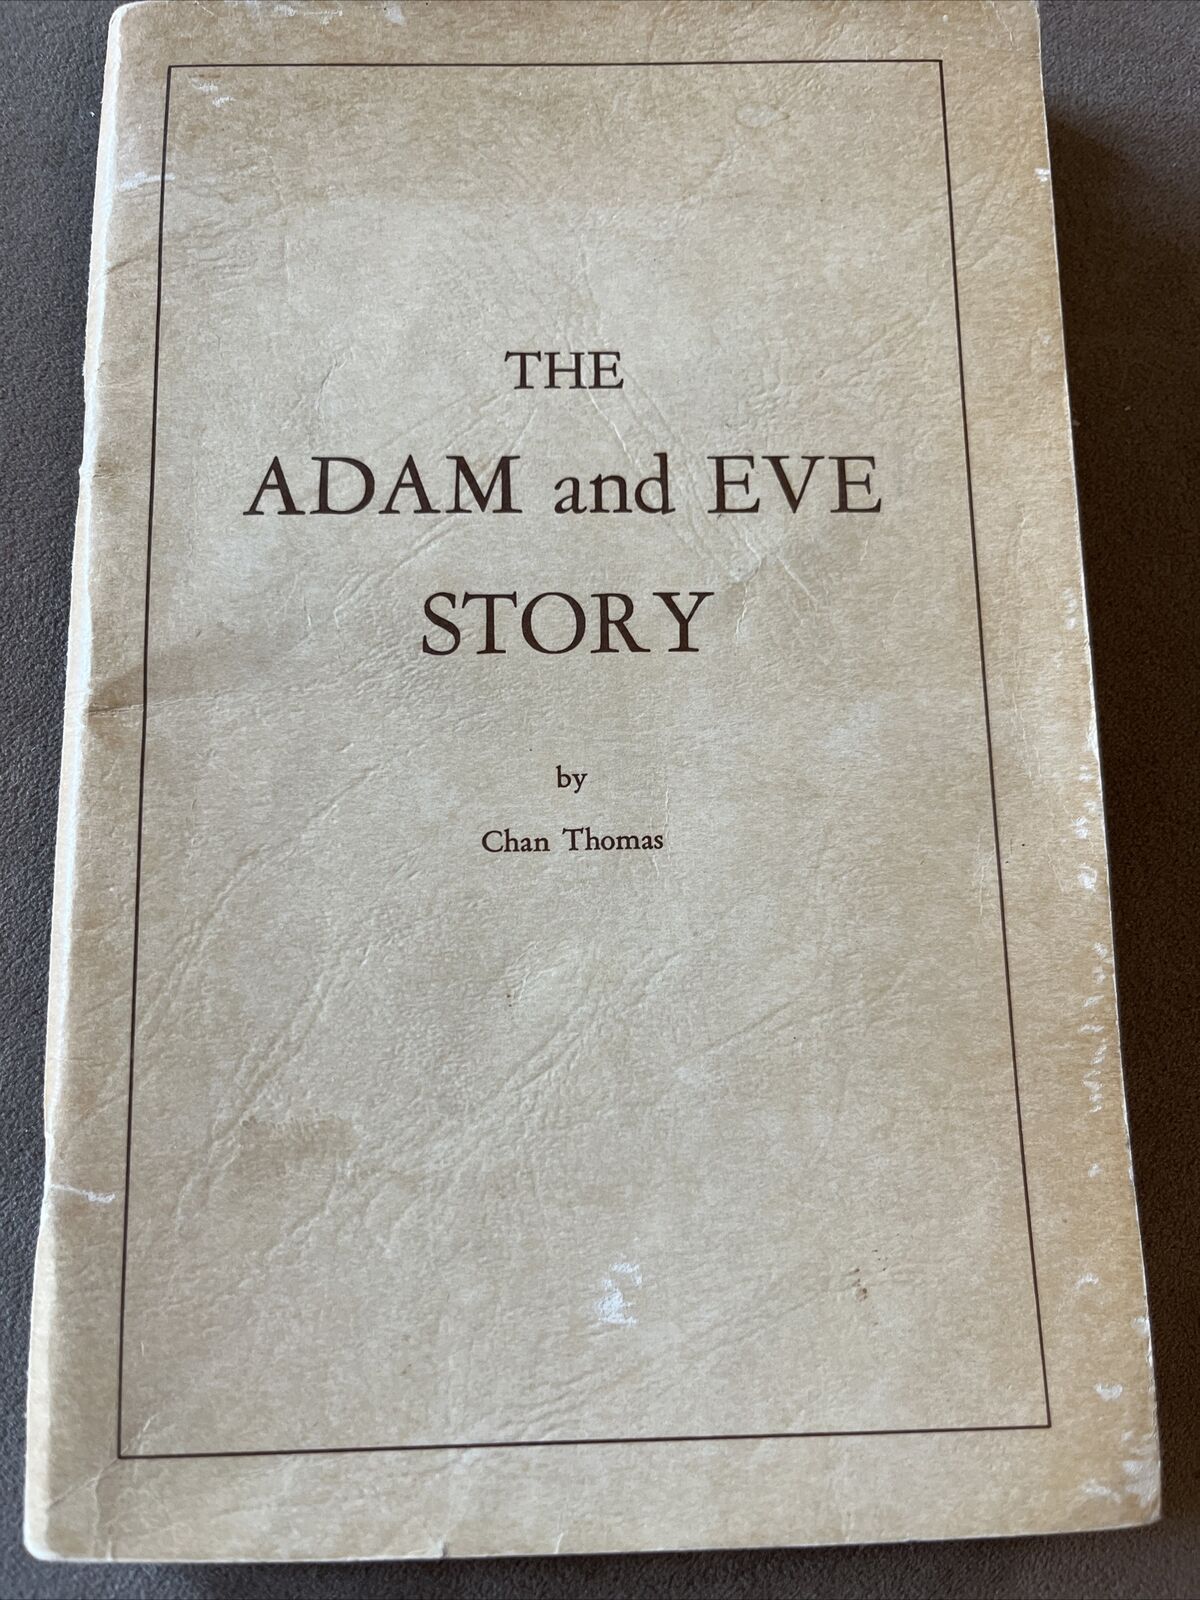 RARE 1965 THE ADAM AND EVE STORY BY CHAN THOMAS 3RD EDITION PAPERBACK ORIGINAL